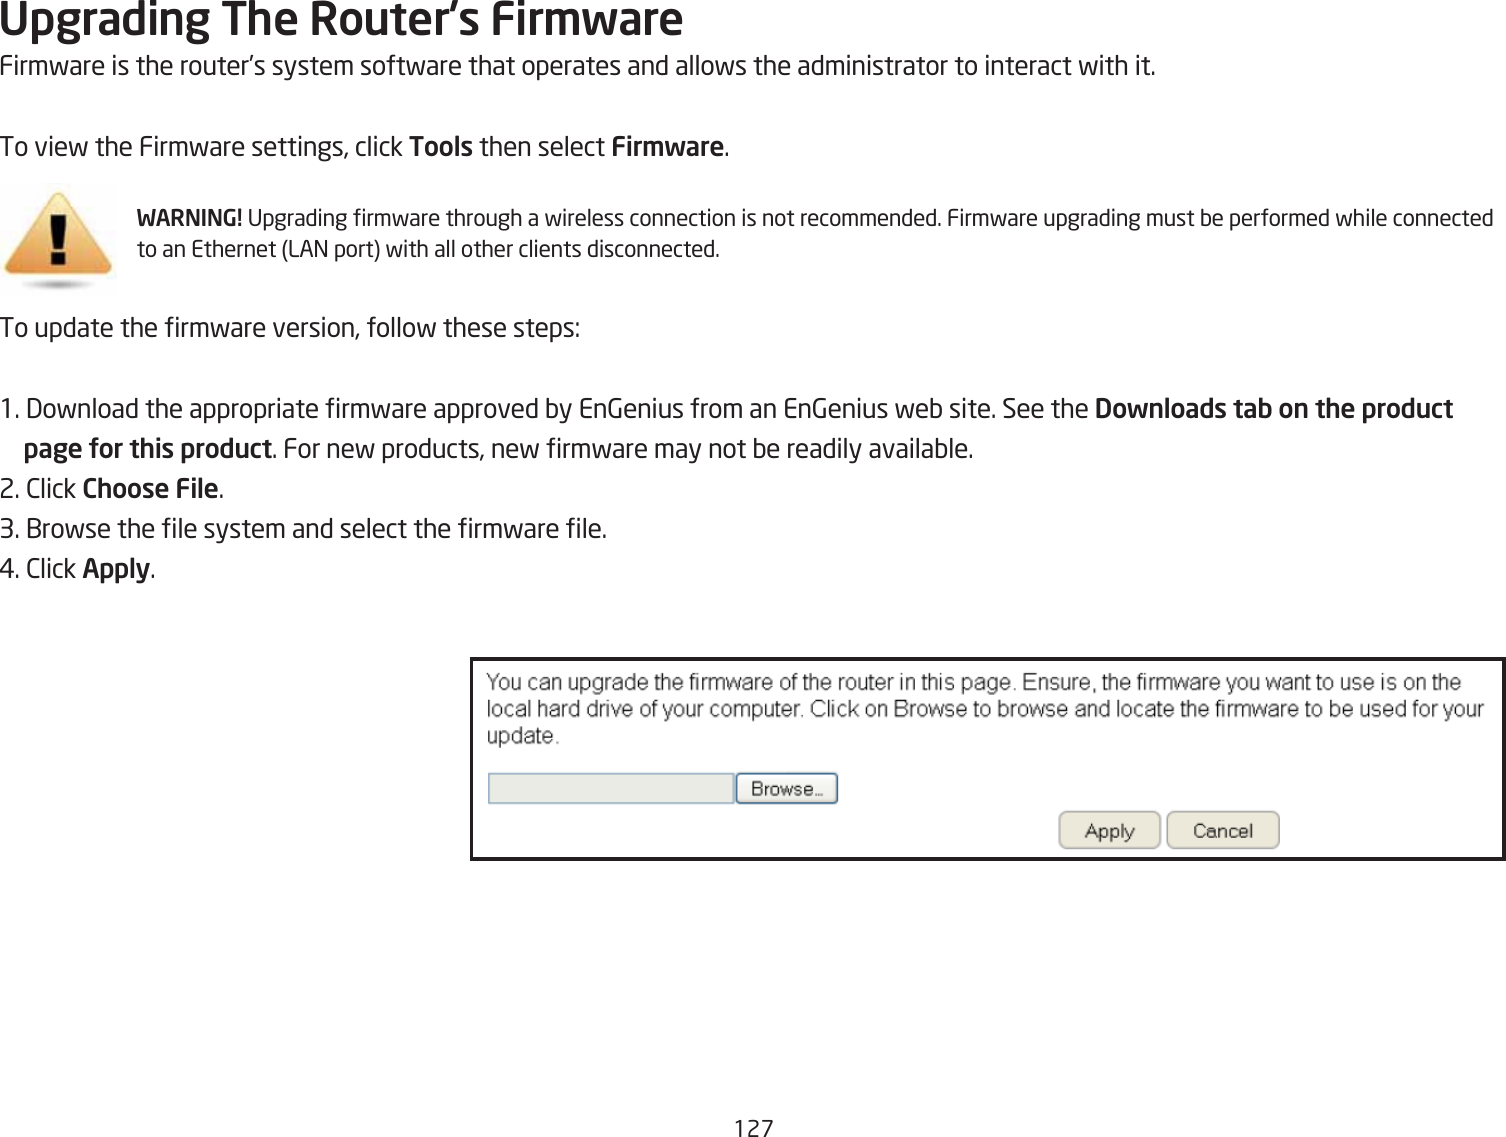 12&amp;Upgrading The Router{s Fir\wareFirmfare is the router’s system softfare that operates and allofs the administrator to interact fith it.To vief the Firmfare settings, click Tools then select Fir\ware.WARNING! Upgrading rmfare through a fireless connection is not recommended. Firmfare upgrading must Qe performed fhile connected to an Ethernet LA= port fith all other clients disconnected.To update the rmfare version, follof these steps:1. 3ofnload the appropriate rmfare approved Qy En6enius from an En6enius feQ site. See the Downloads tab on the product     page Uor this product. For nef products, nef rmfare may not Qe readily availaQle.2. 2lick Choose File.3. 1rofse the le system and select the rmfare le.#. 2lick Apply.